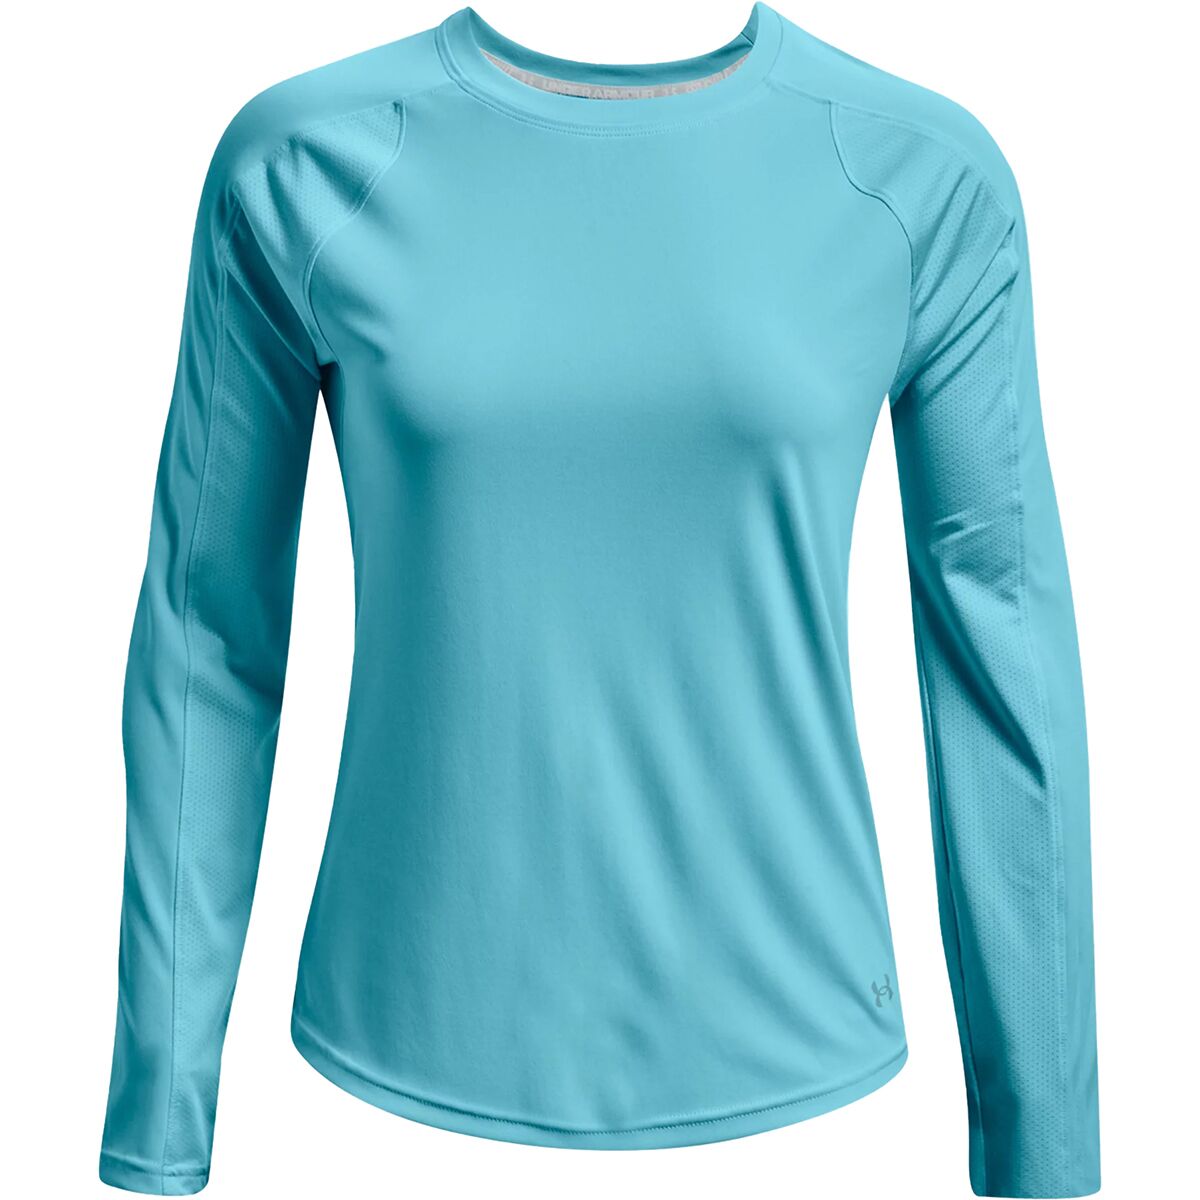 Under Armour Iso-Chill Shore Break Long-Sleeve Top - Women's - Clothing